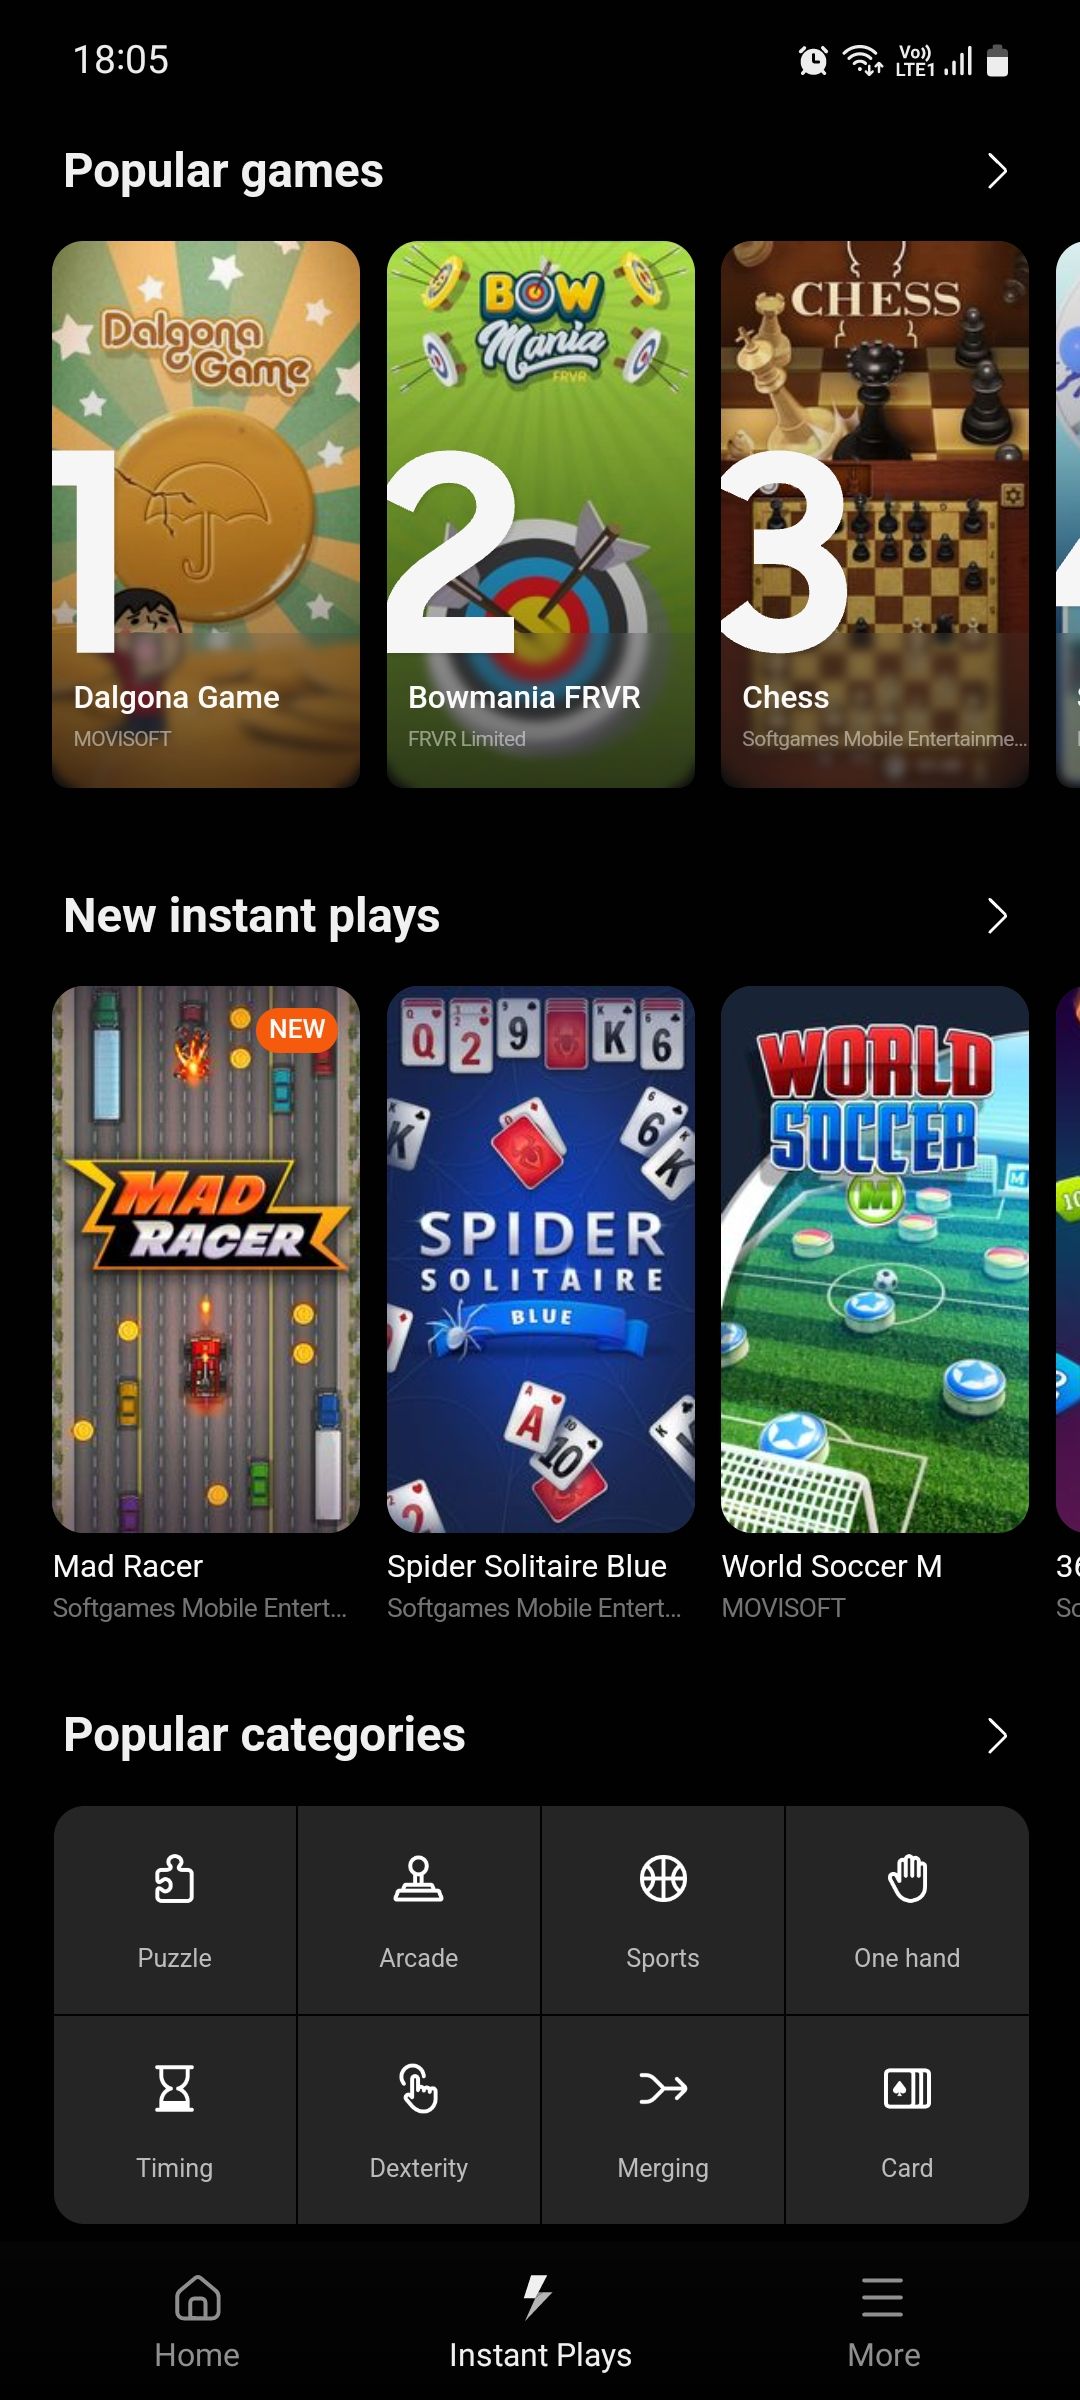 Samsung Game Launcher Instant Plays popular games